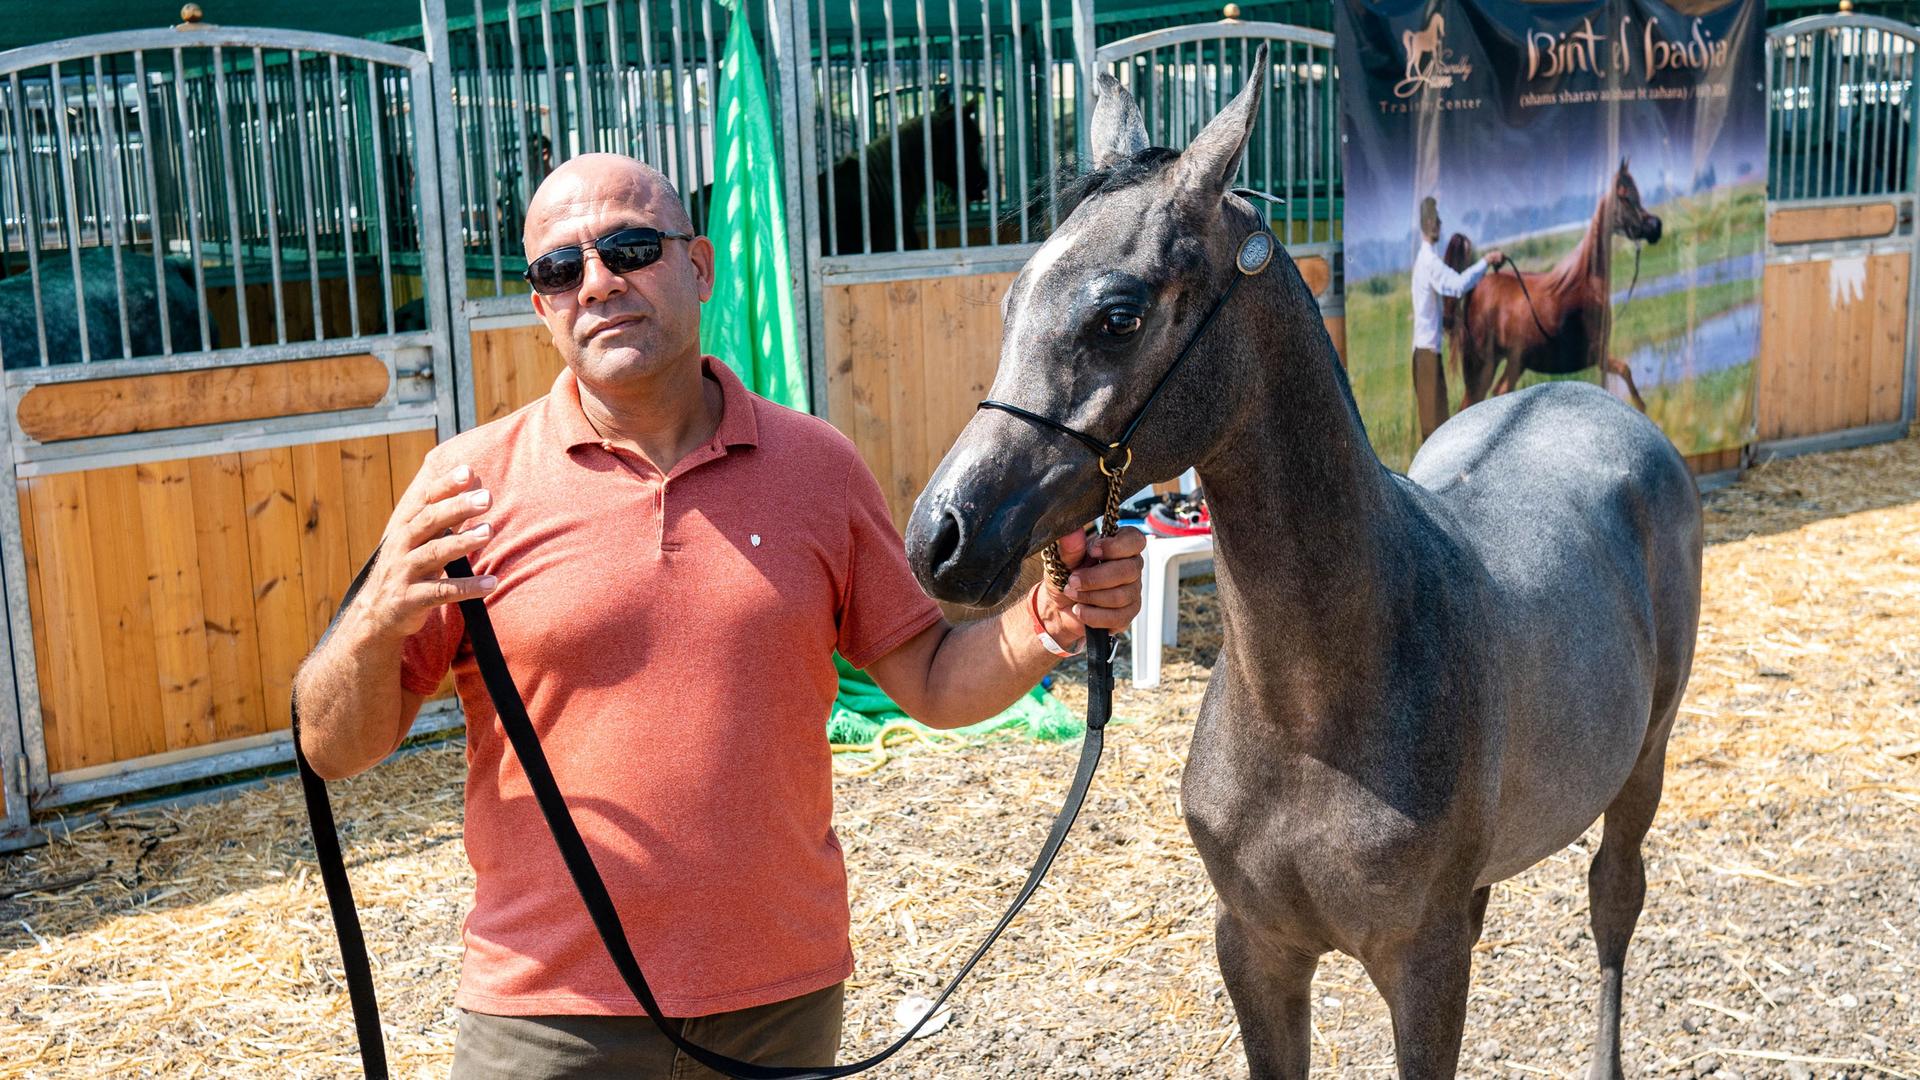 A man is shown wearing a salmon-colored collard shirt and sunglasses while holding the reins of a horse.